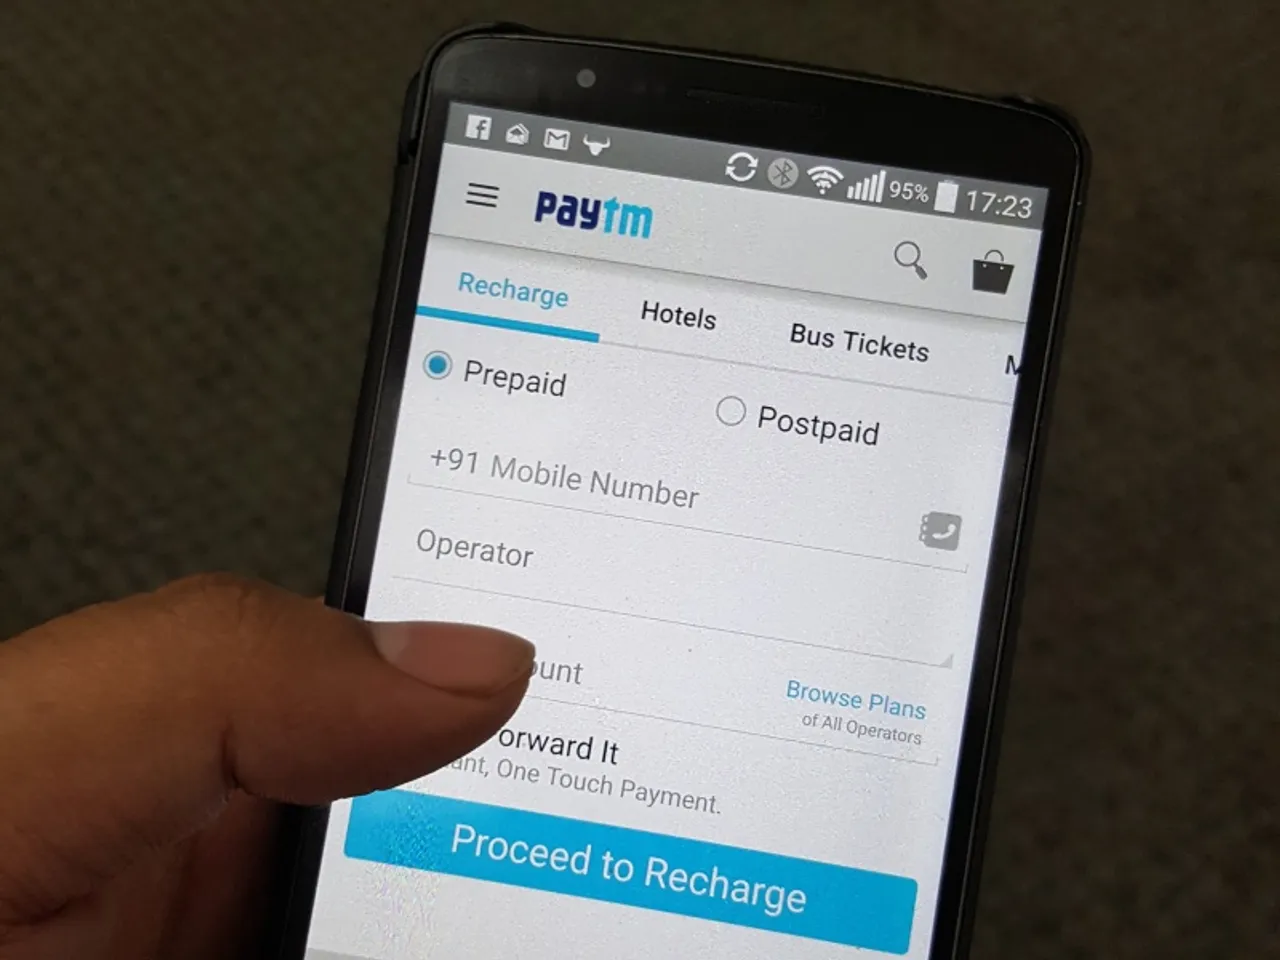 CIOL Paytm withdraws its in-app POS feature over security concerns